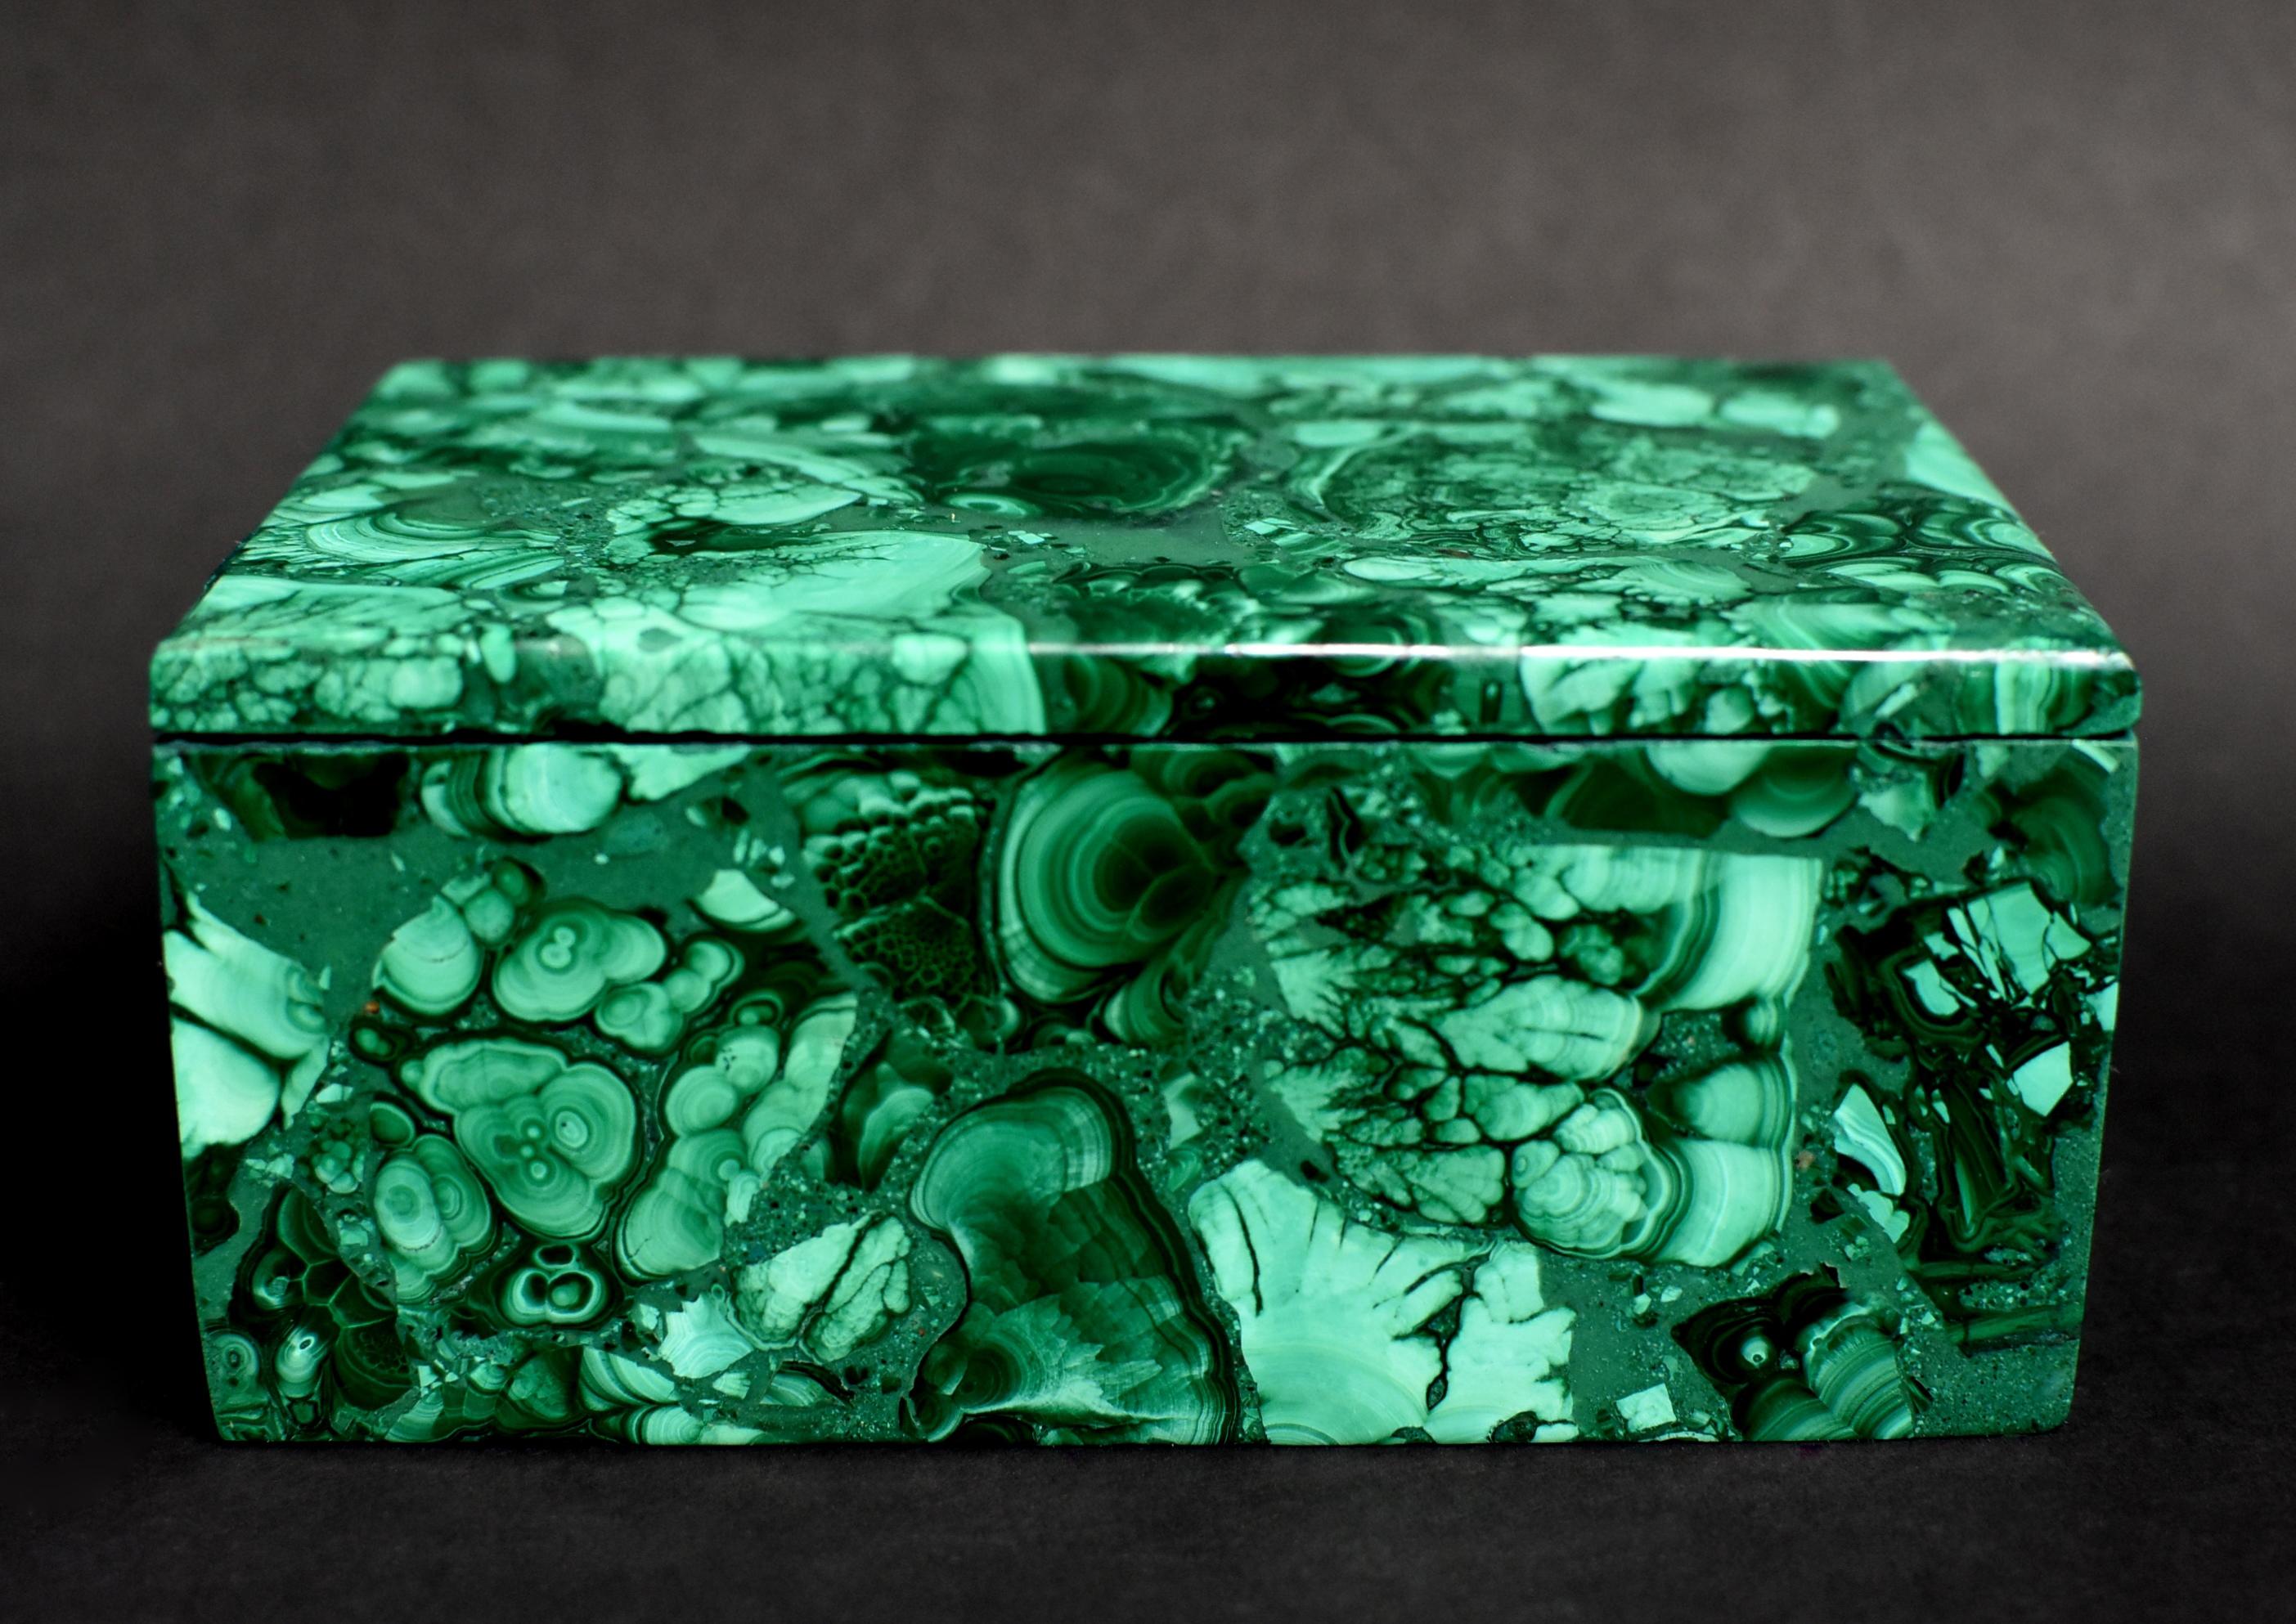 Absolutely spectacular 1.75 lb full-slab all natural malachite box. Splendid swirls and patterns, this remarkable piece is a symbol of luxury and high sophistication. Handmade with custom fit top. Malachite is a stone of transformation, helping one